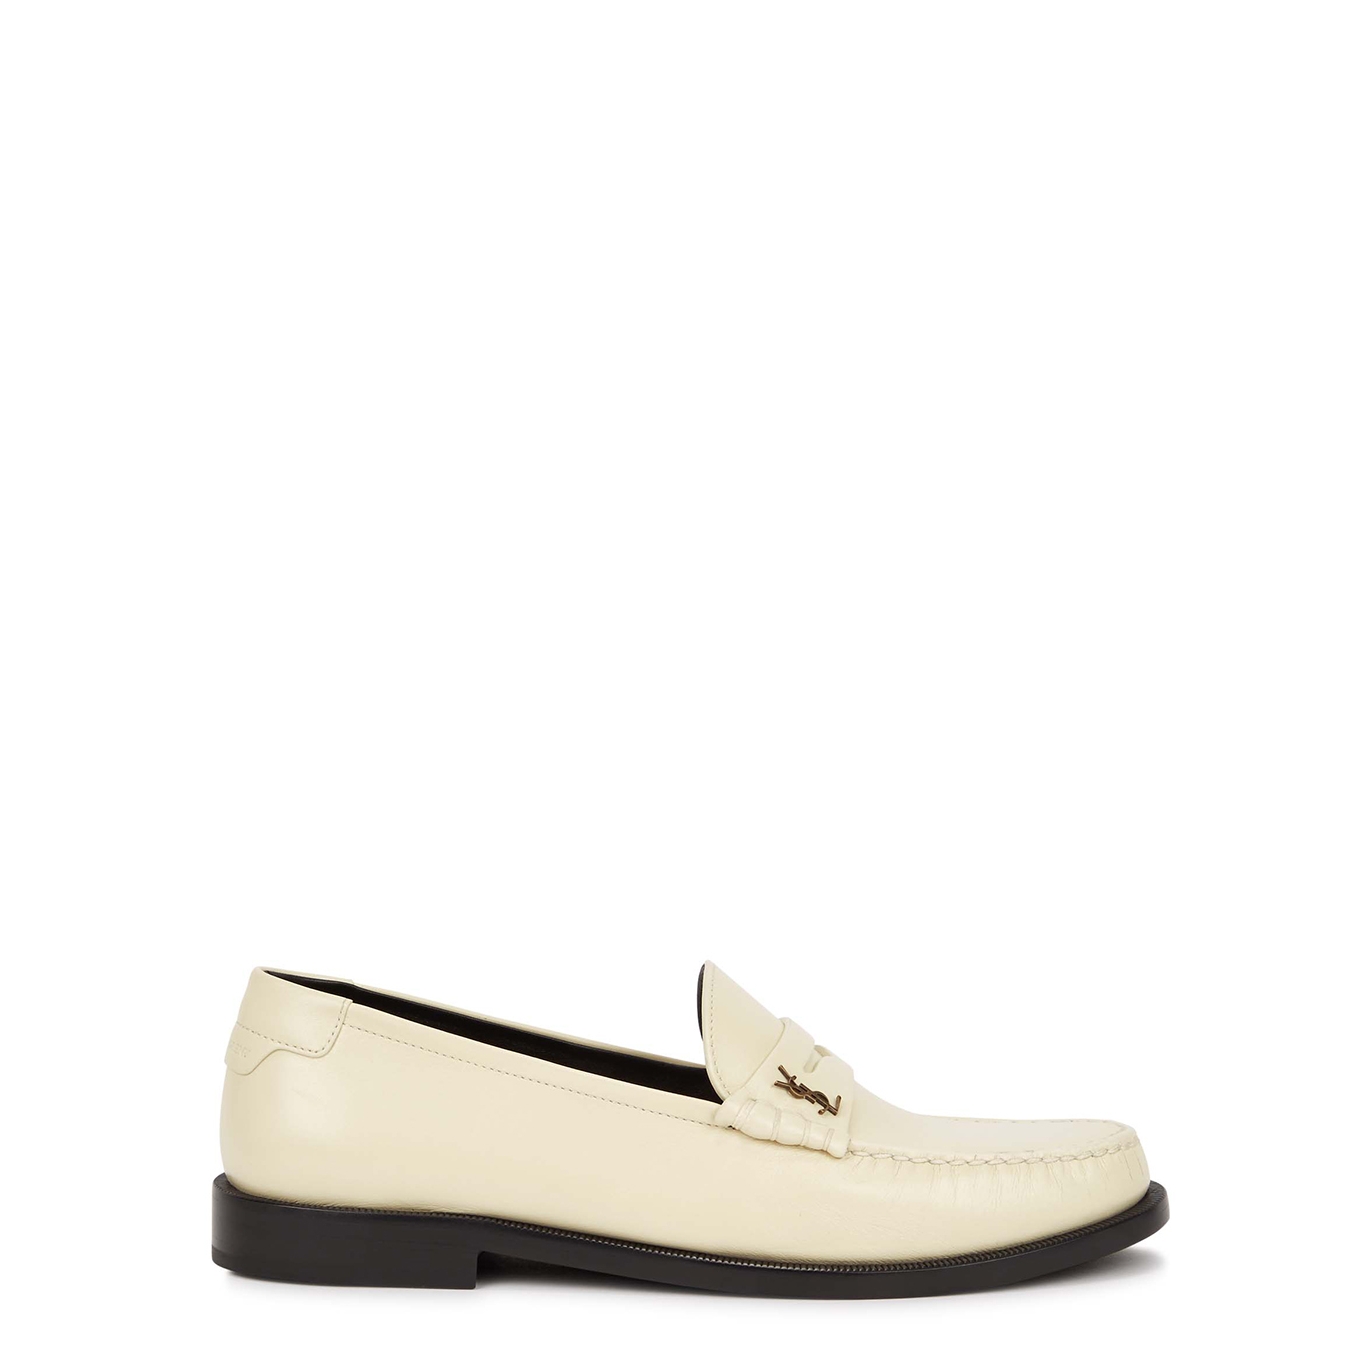 Saint Laurent Le Loafer Cream Leather Penny Loafers - Off White - 7